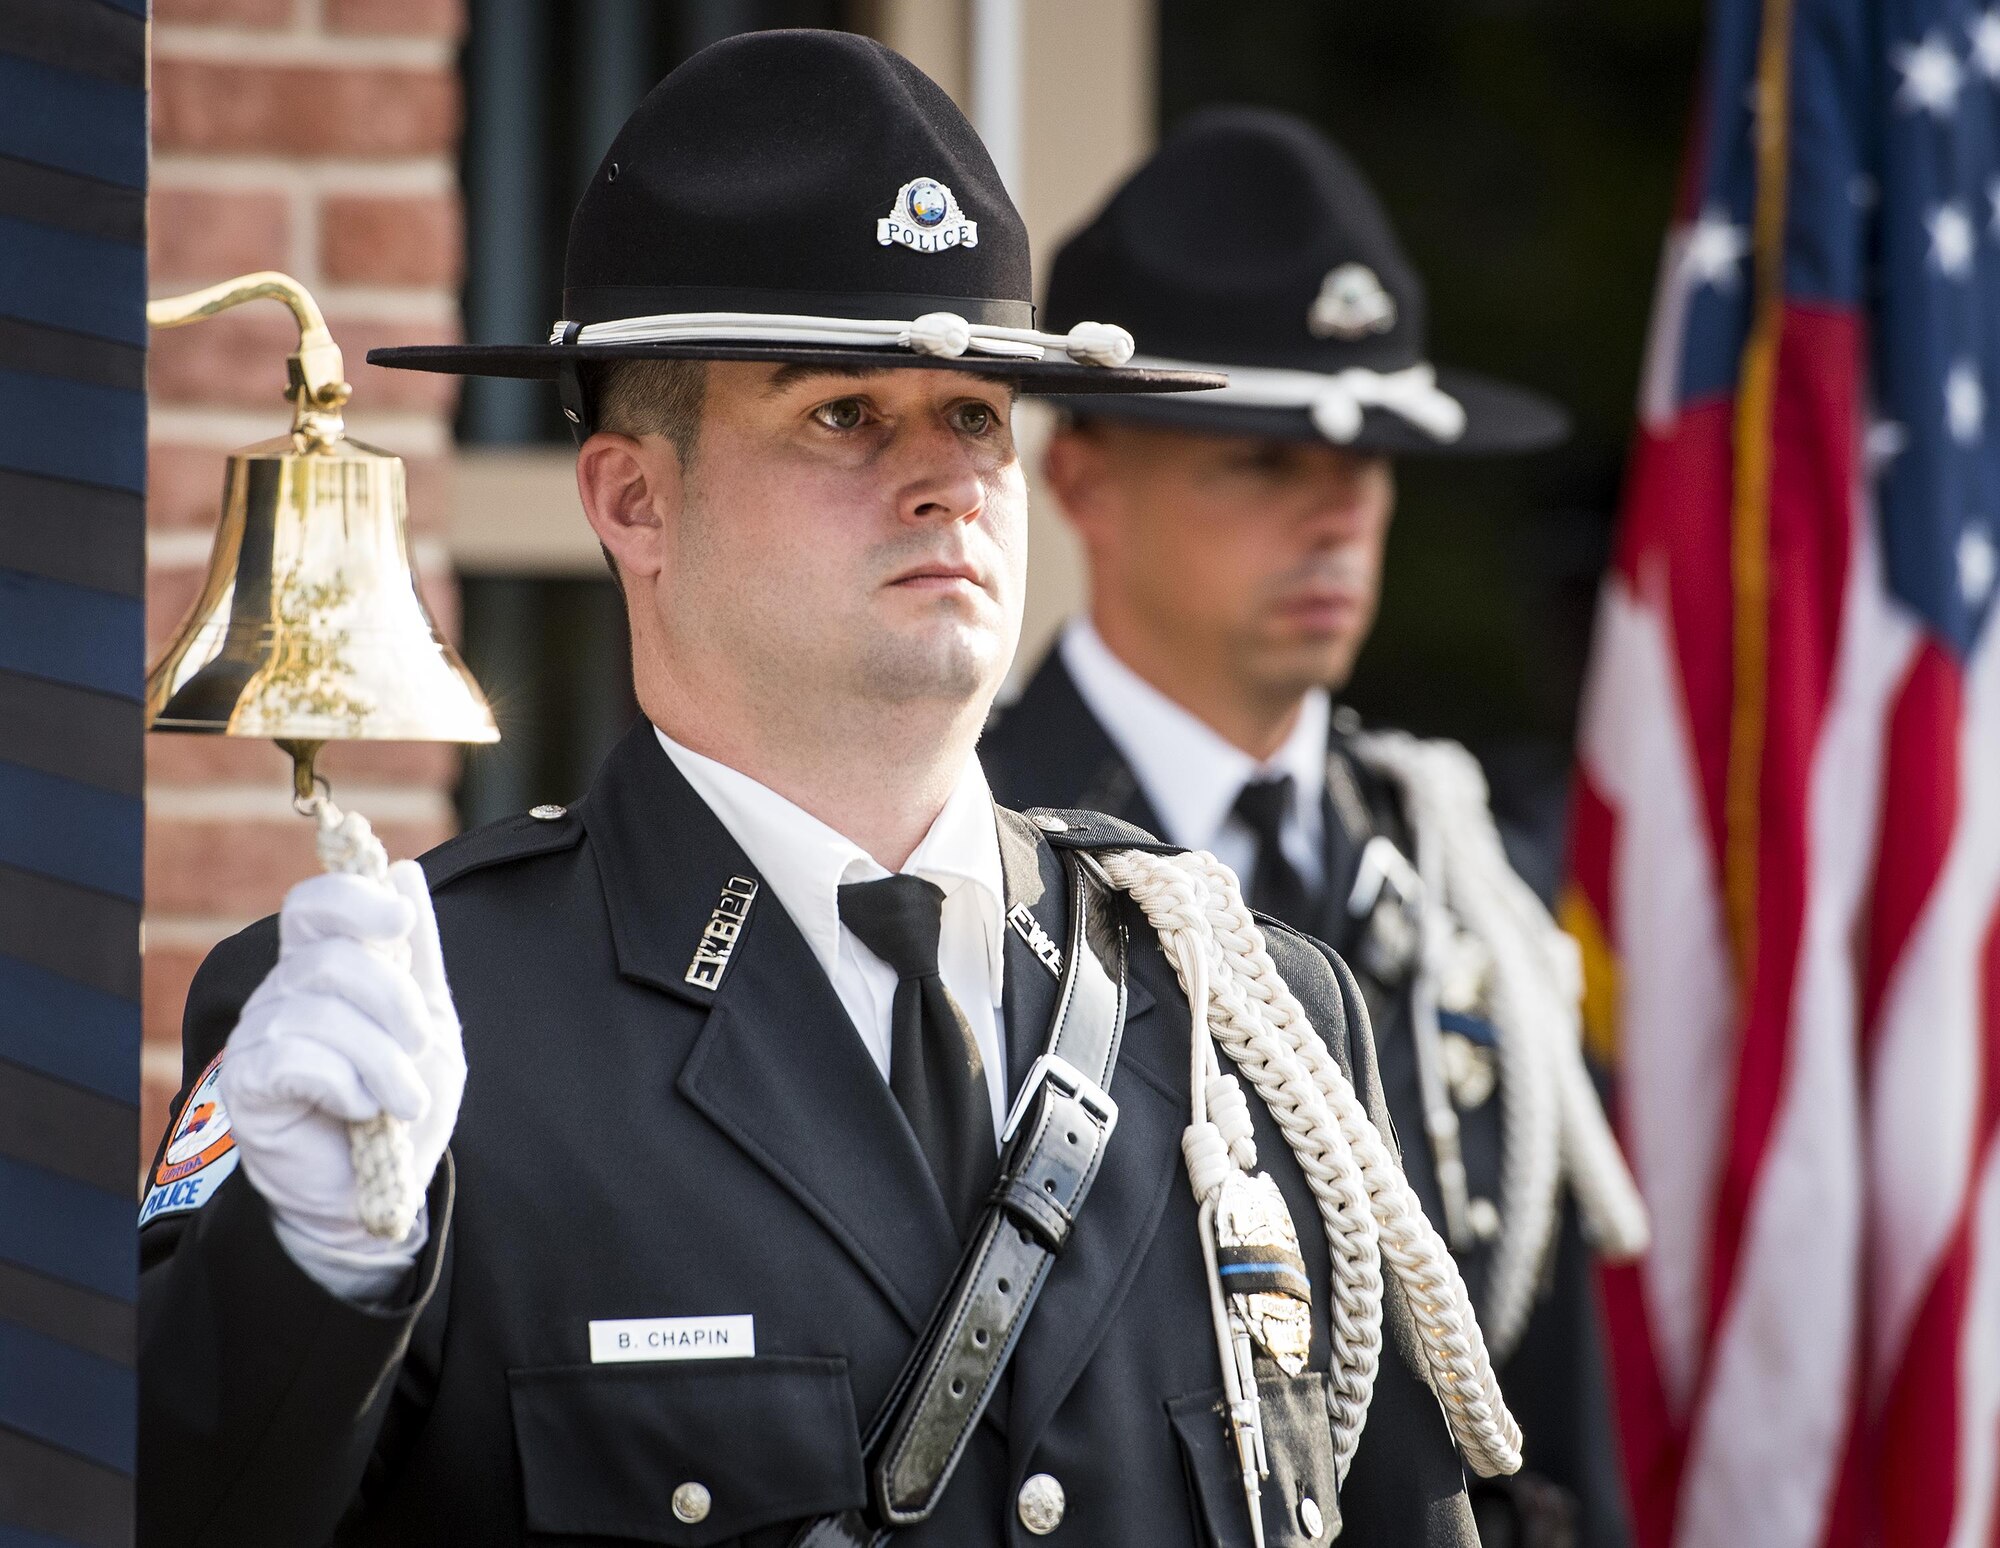 Fort Walton Beach Police Officer Chapin rings a bell as each name of fallen local police officers are called out at the Peace Officers’ Memorial Ceremony May 18 in Fort Walton Beach, Fla. The ceremony was to honor fallen police officers from the previous year by reading their names aloud. Security forces Airmen from Eglin and Hurlburt Field attended and participated in the event. The ceremony is one of many events taking place during National Police Week. (U.S. Air Force photo/Samuel King Jr.)